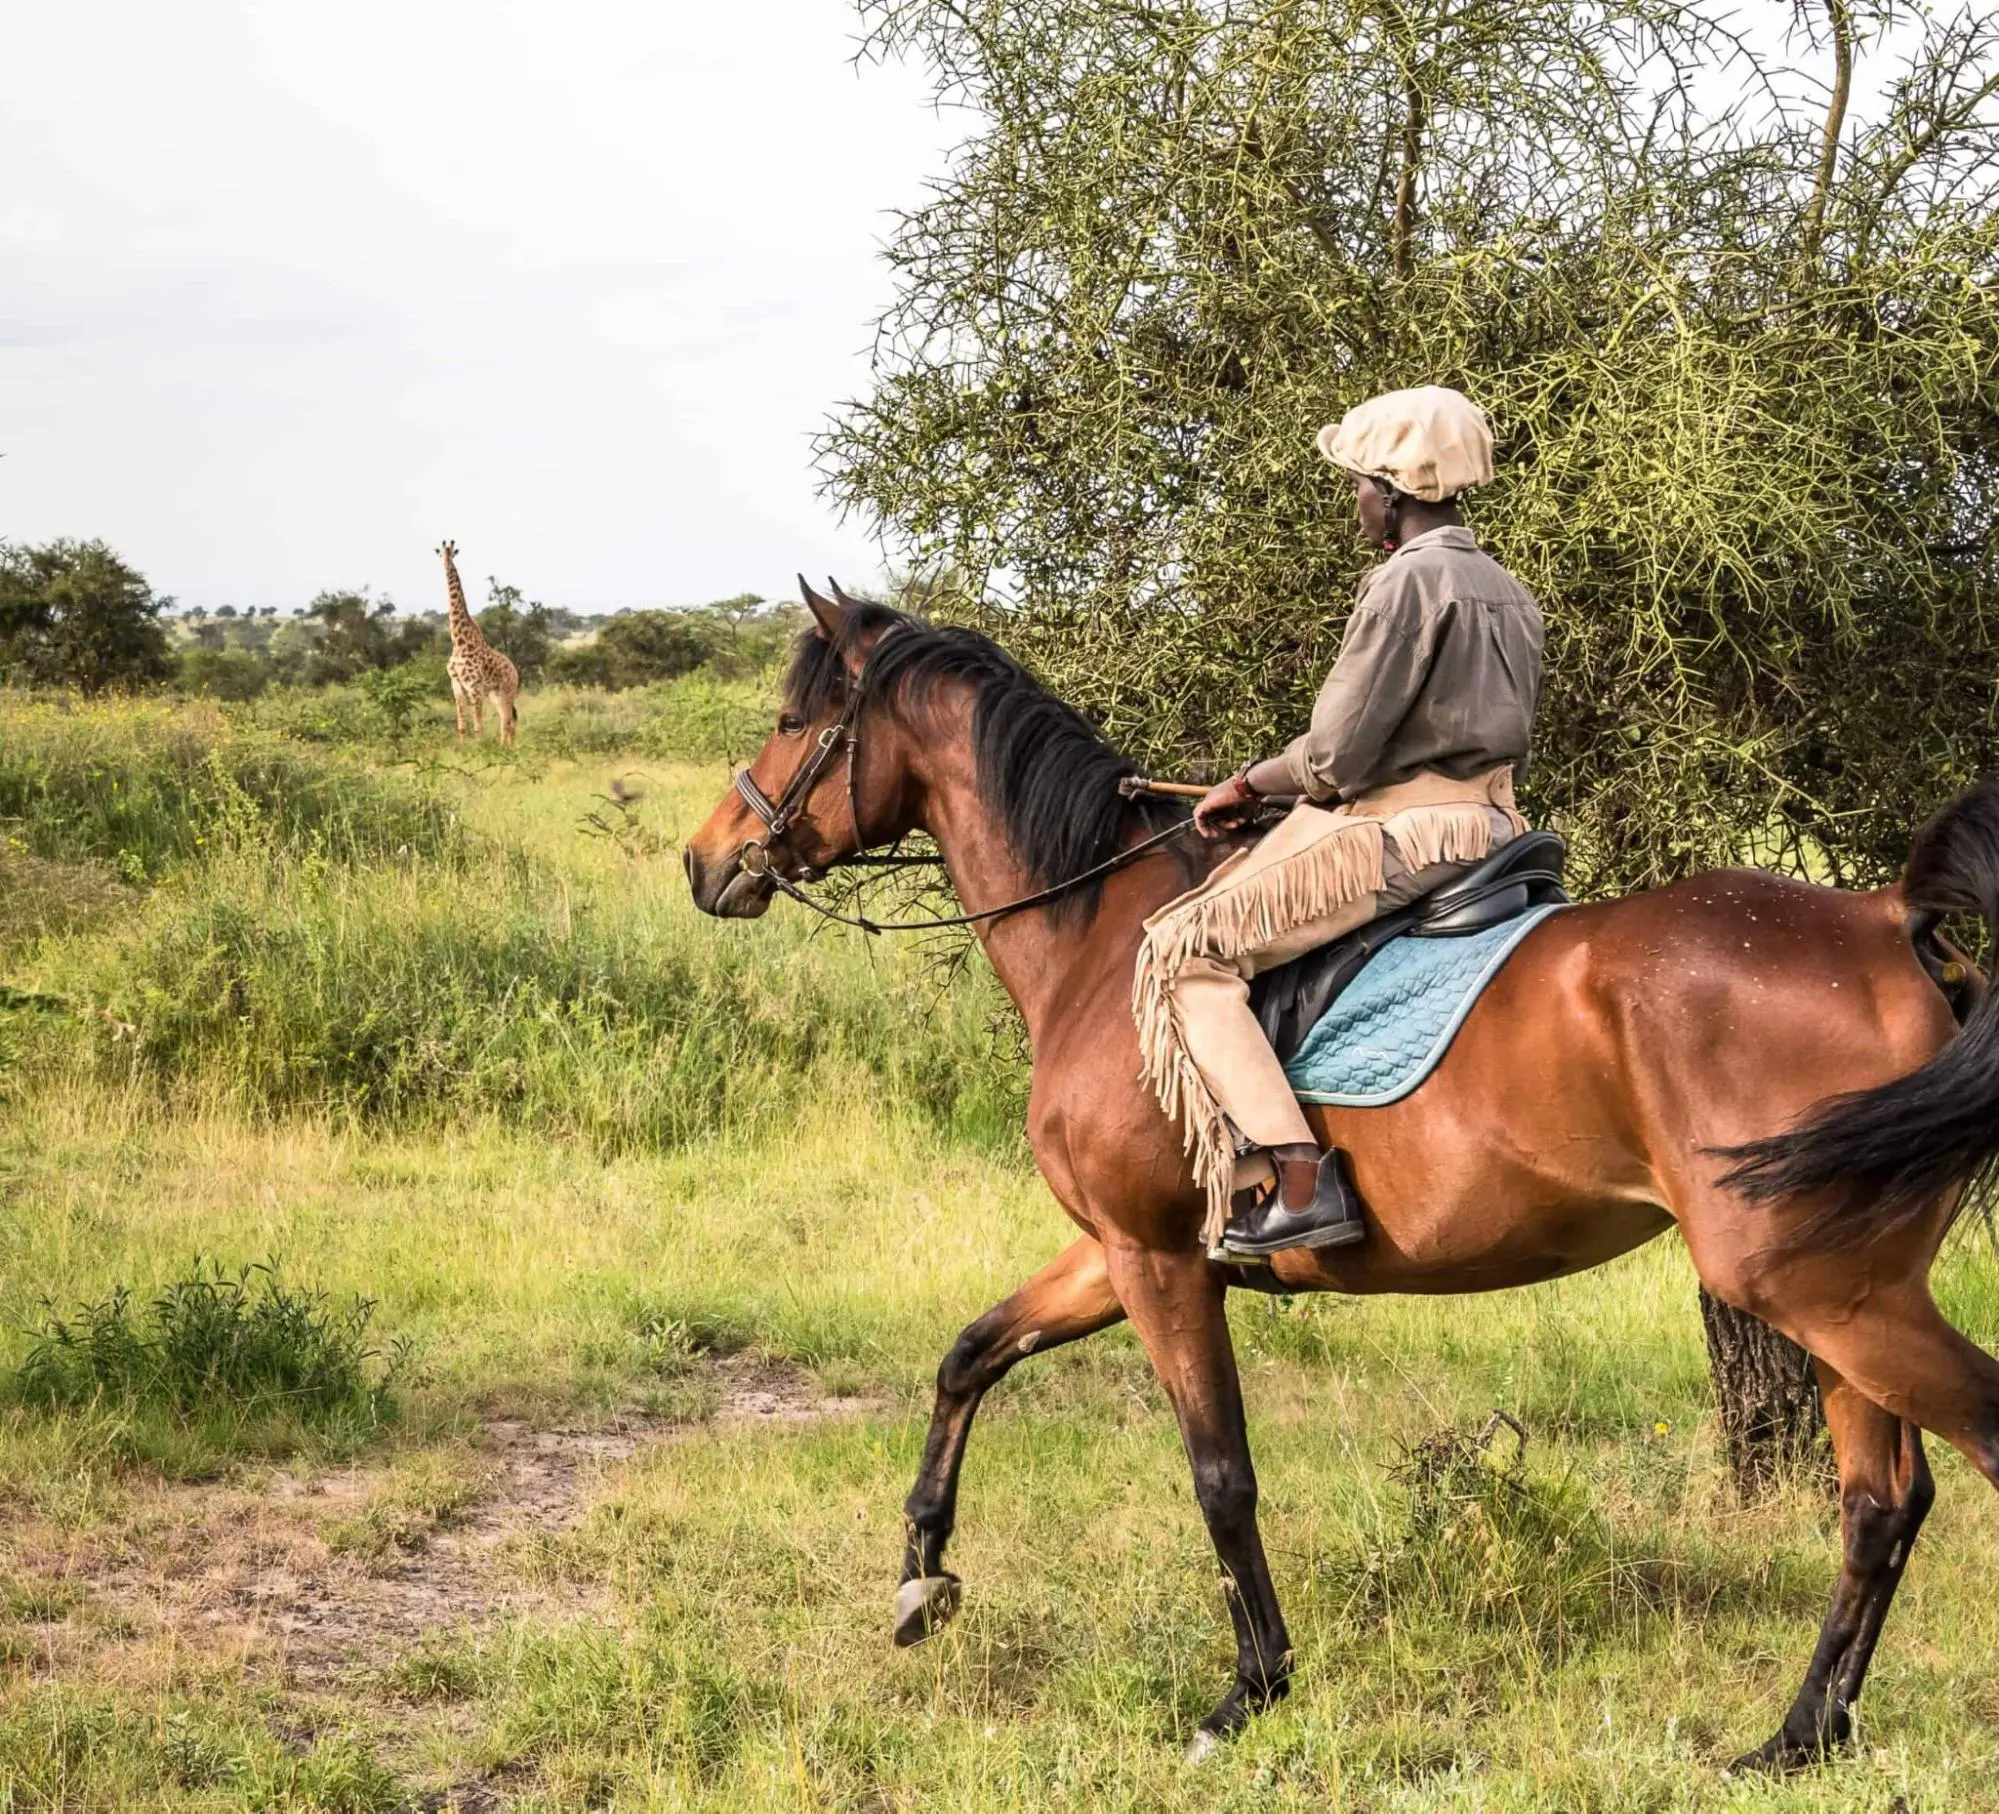 Best time to visit Kenya for a safari is October when weather can allow horseback riding safaris in Kenya